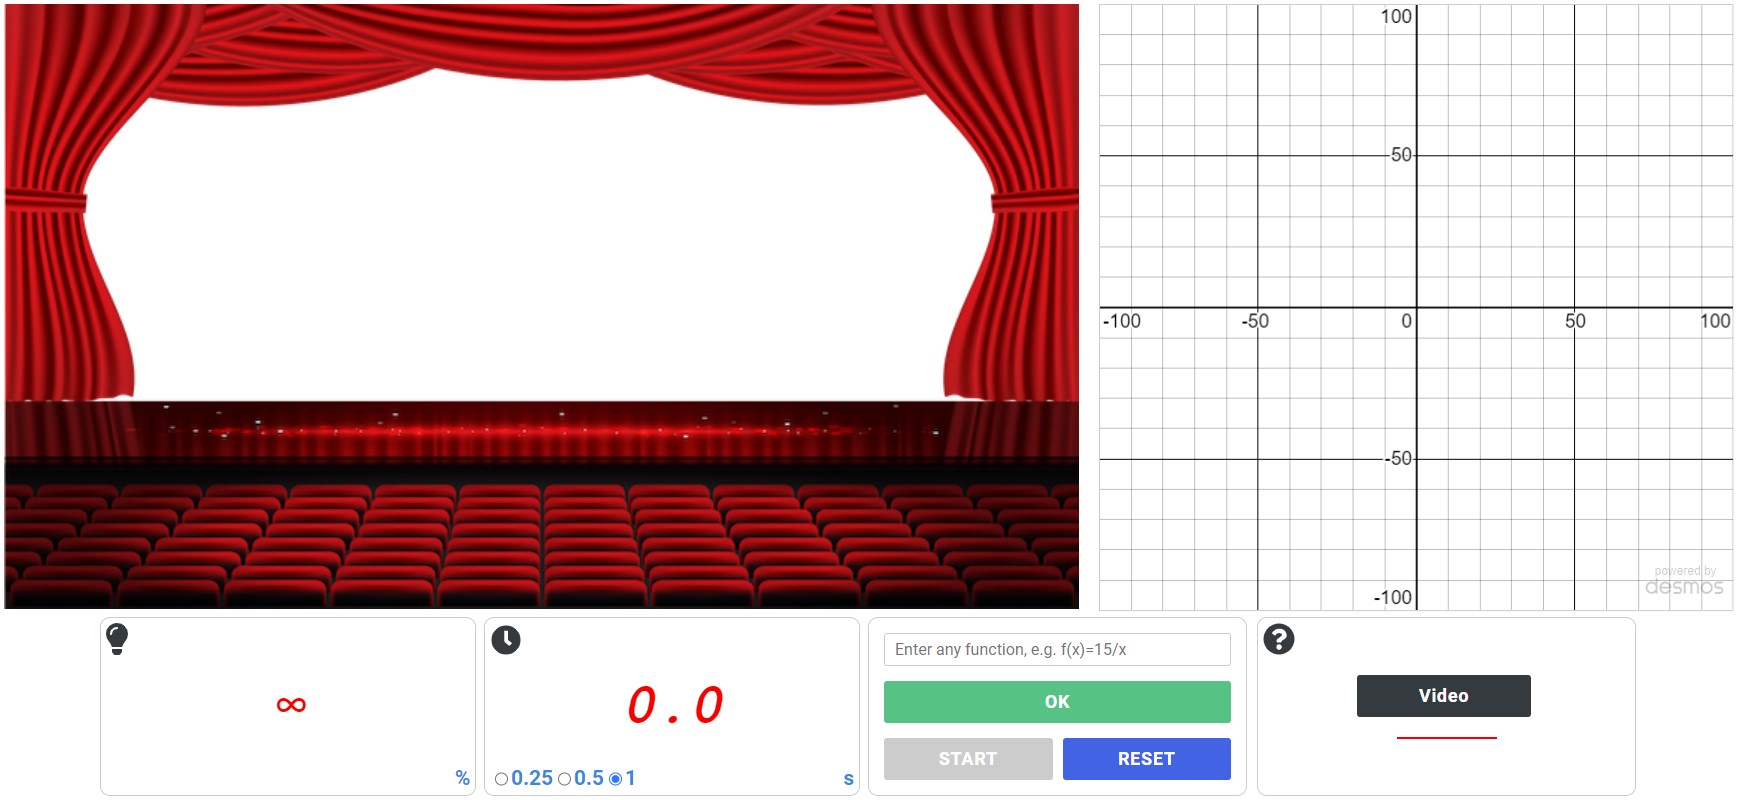 Screenshot of simulation software illustrating the behavior of a linear function. The image features a theatre stage, a Cartesian coordinate plane, and a form for entering a linear function.